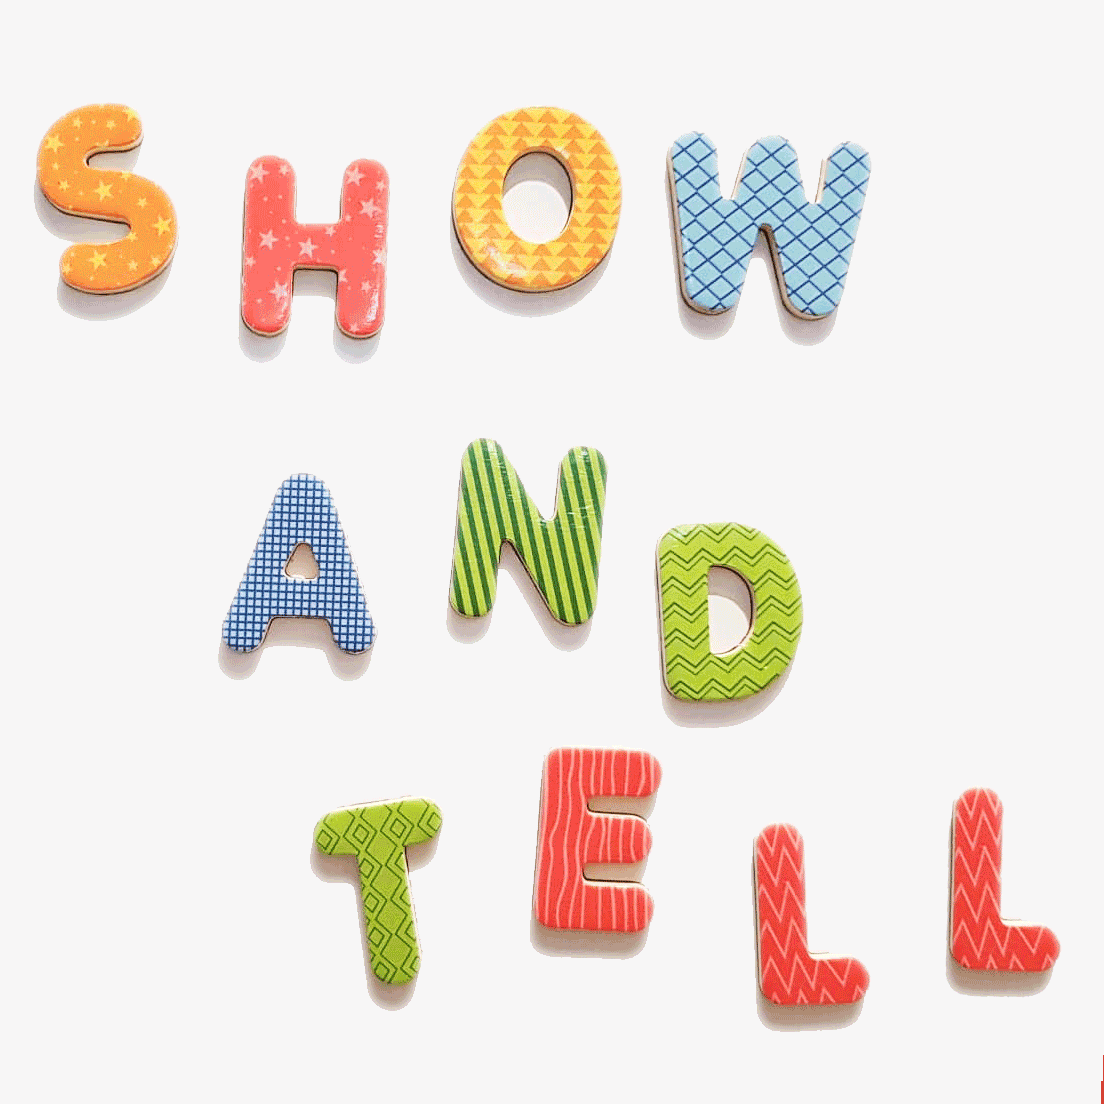 show and tell images